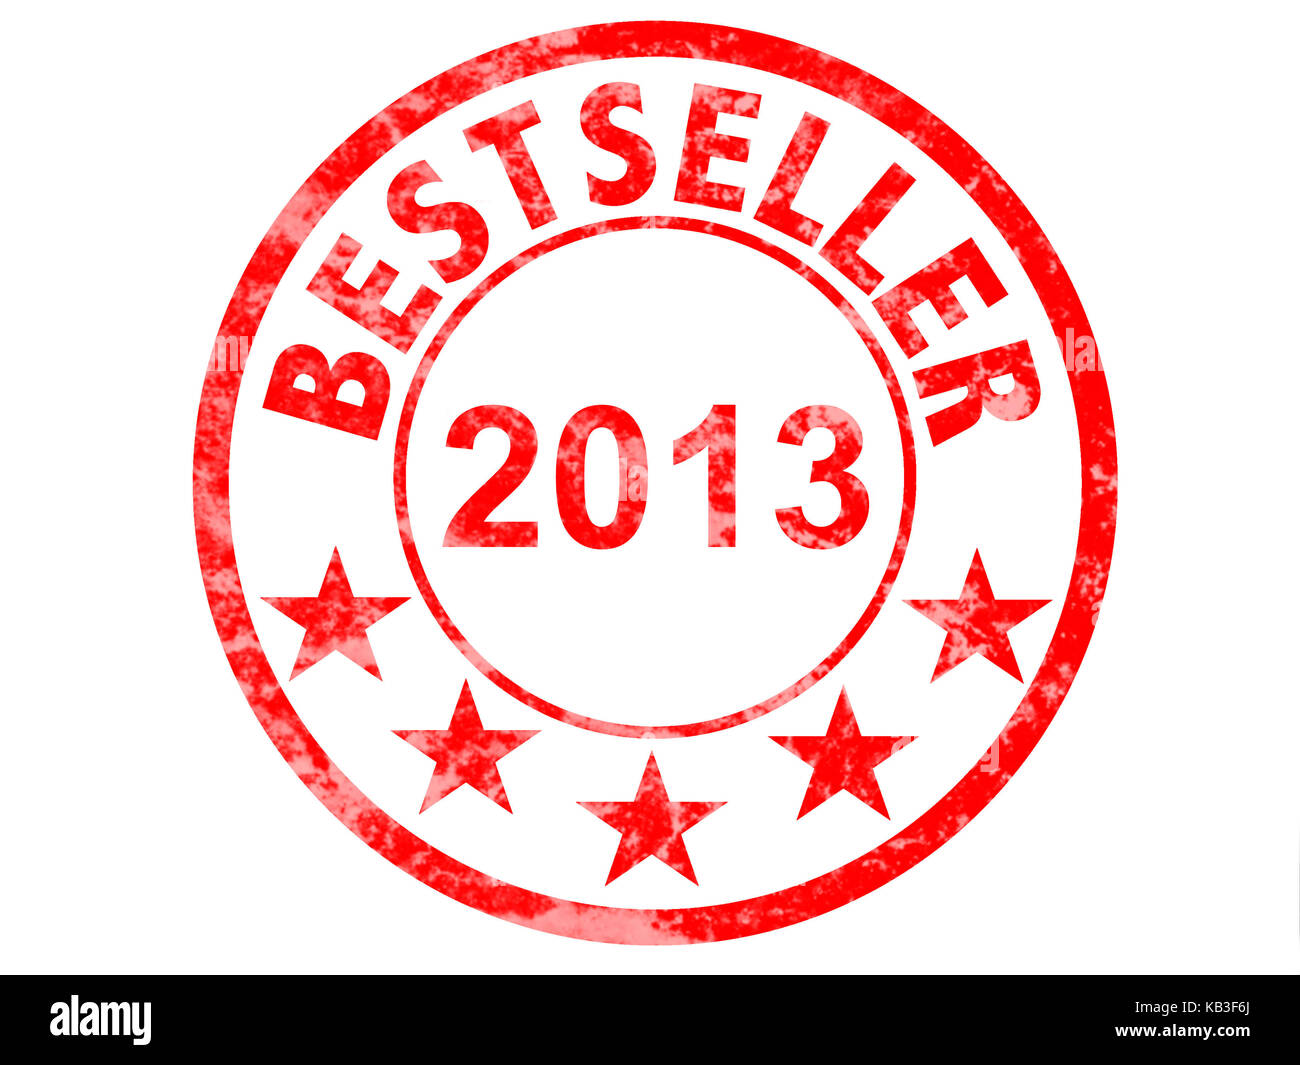 Timbro, best-seller 2013, Foto Stock